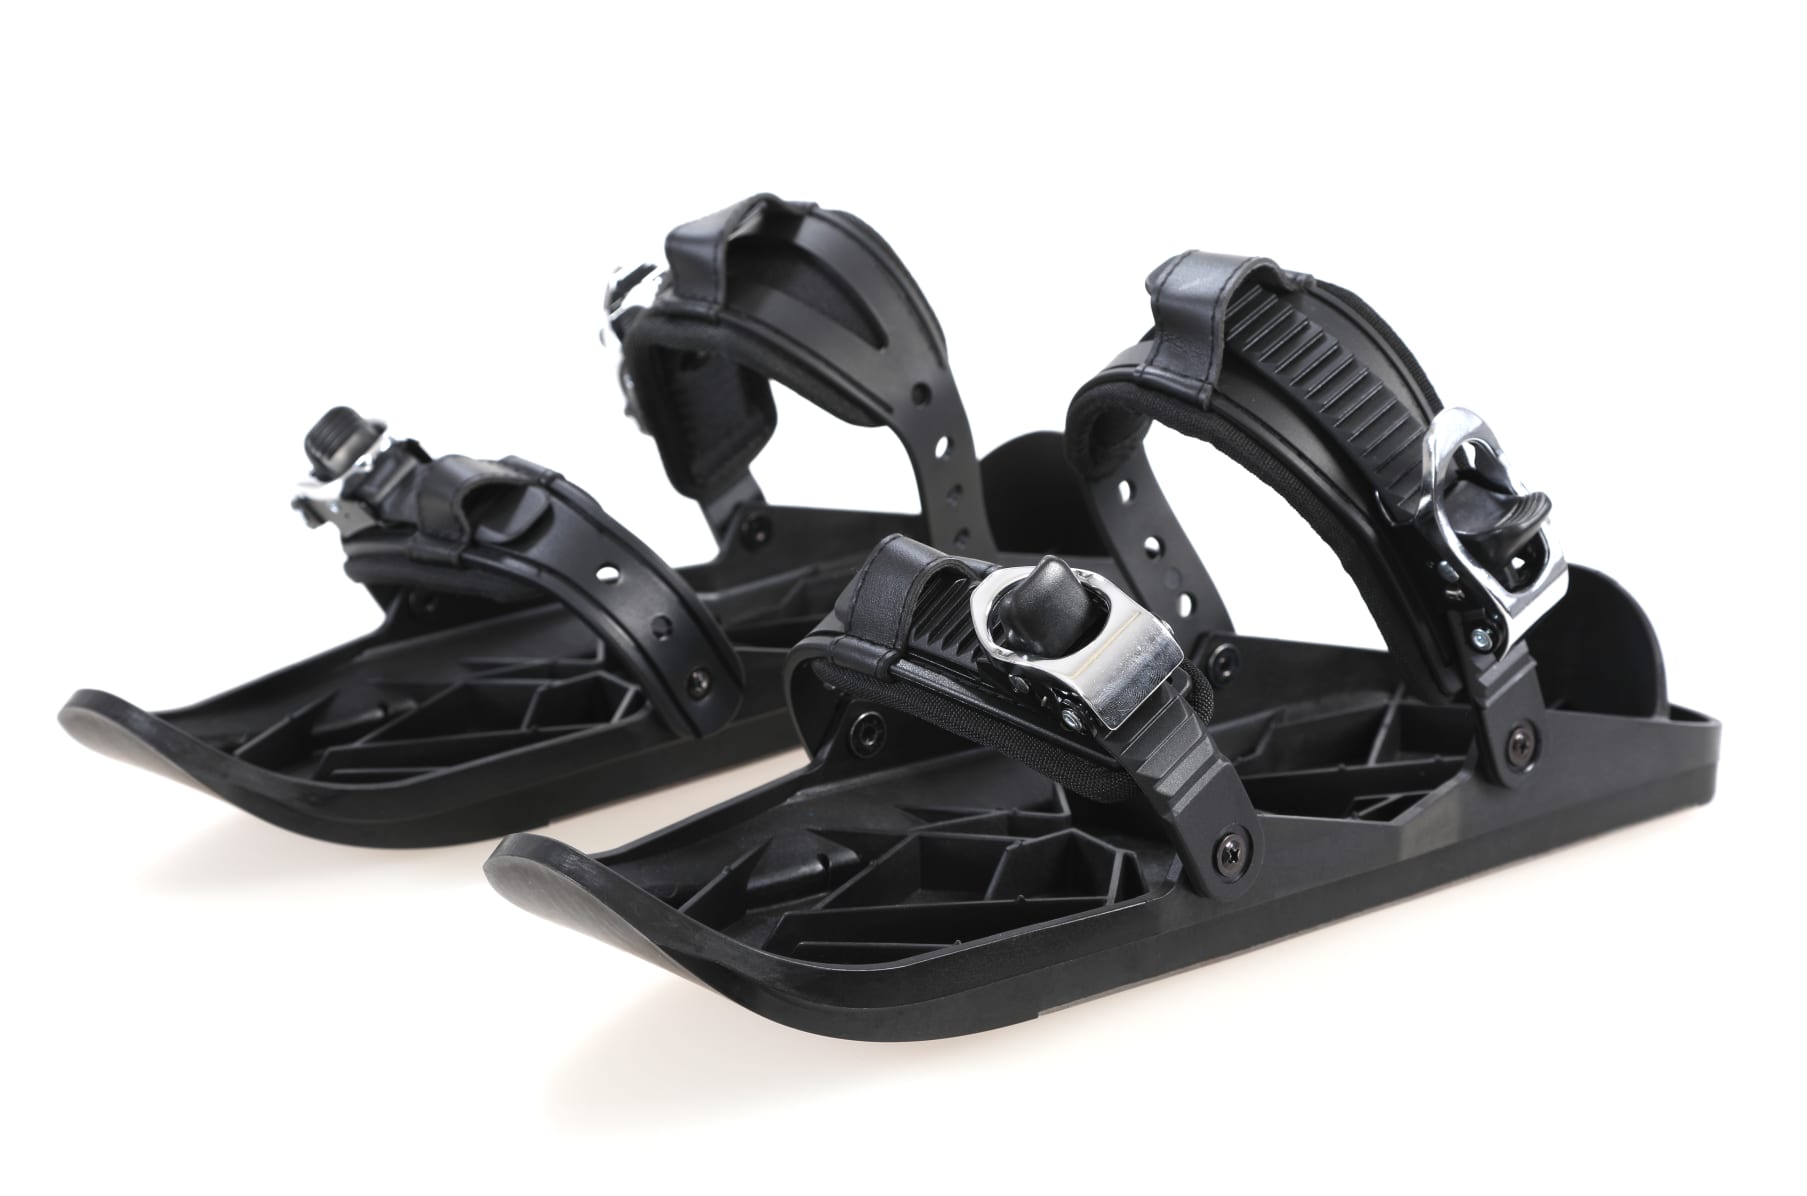 Snowfeet II: Attachments That Turn Shoes Into Skis | Indiegogo